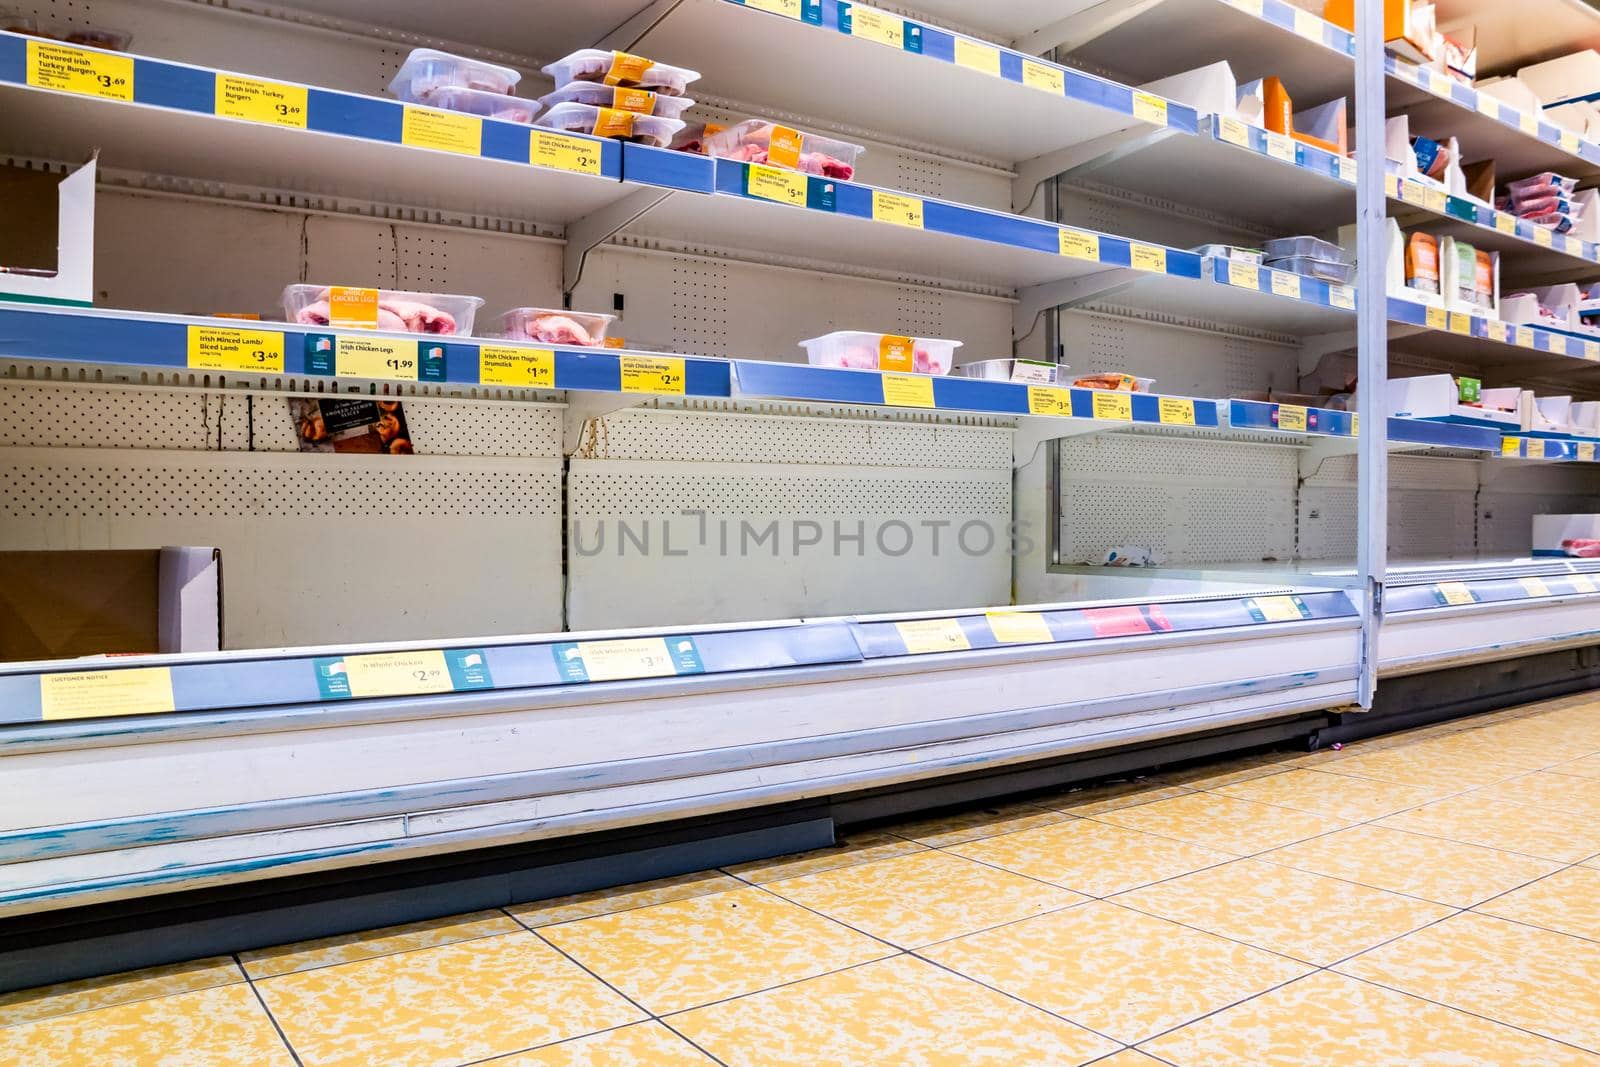 DUNGLOE / IRELAND - MARCH 17 2020 : The chicken shelves are empty during the coronavirus outbreak.